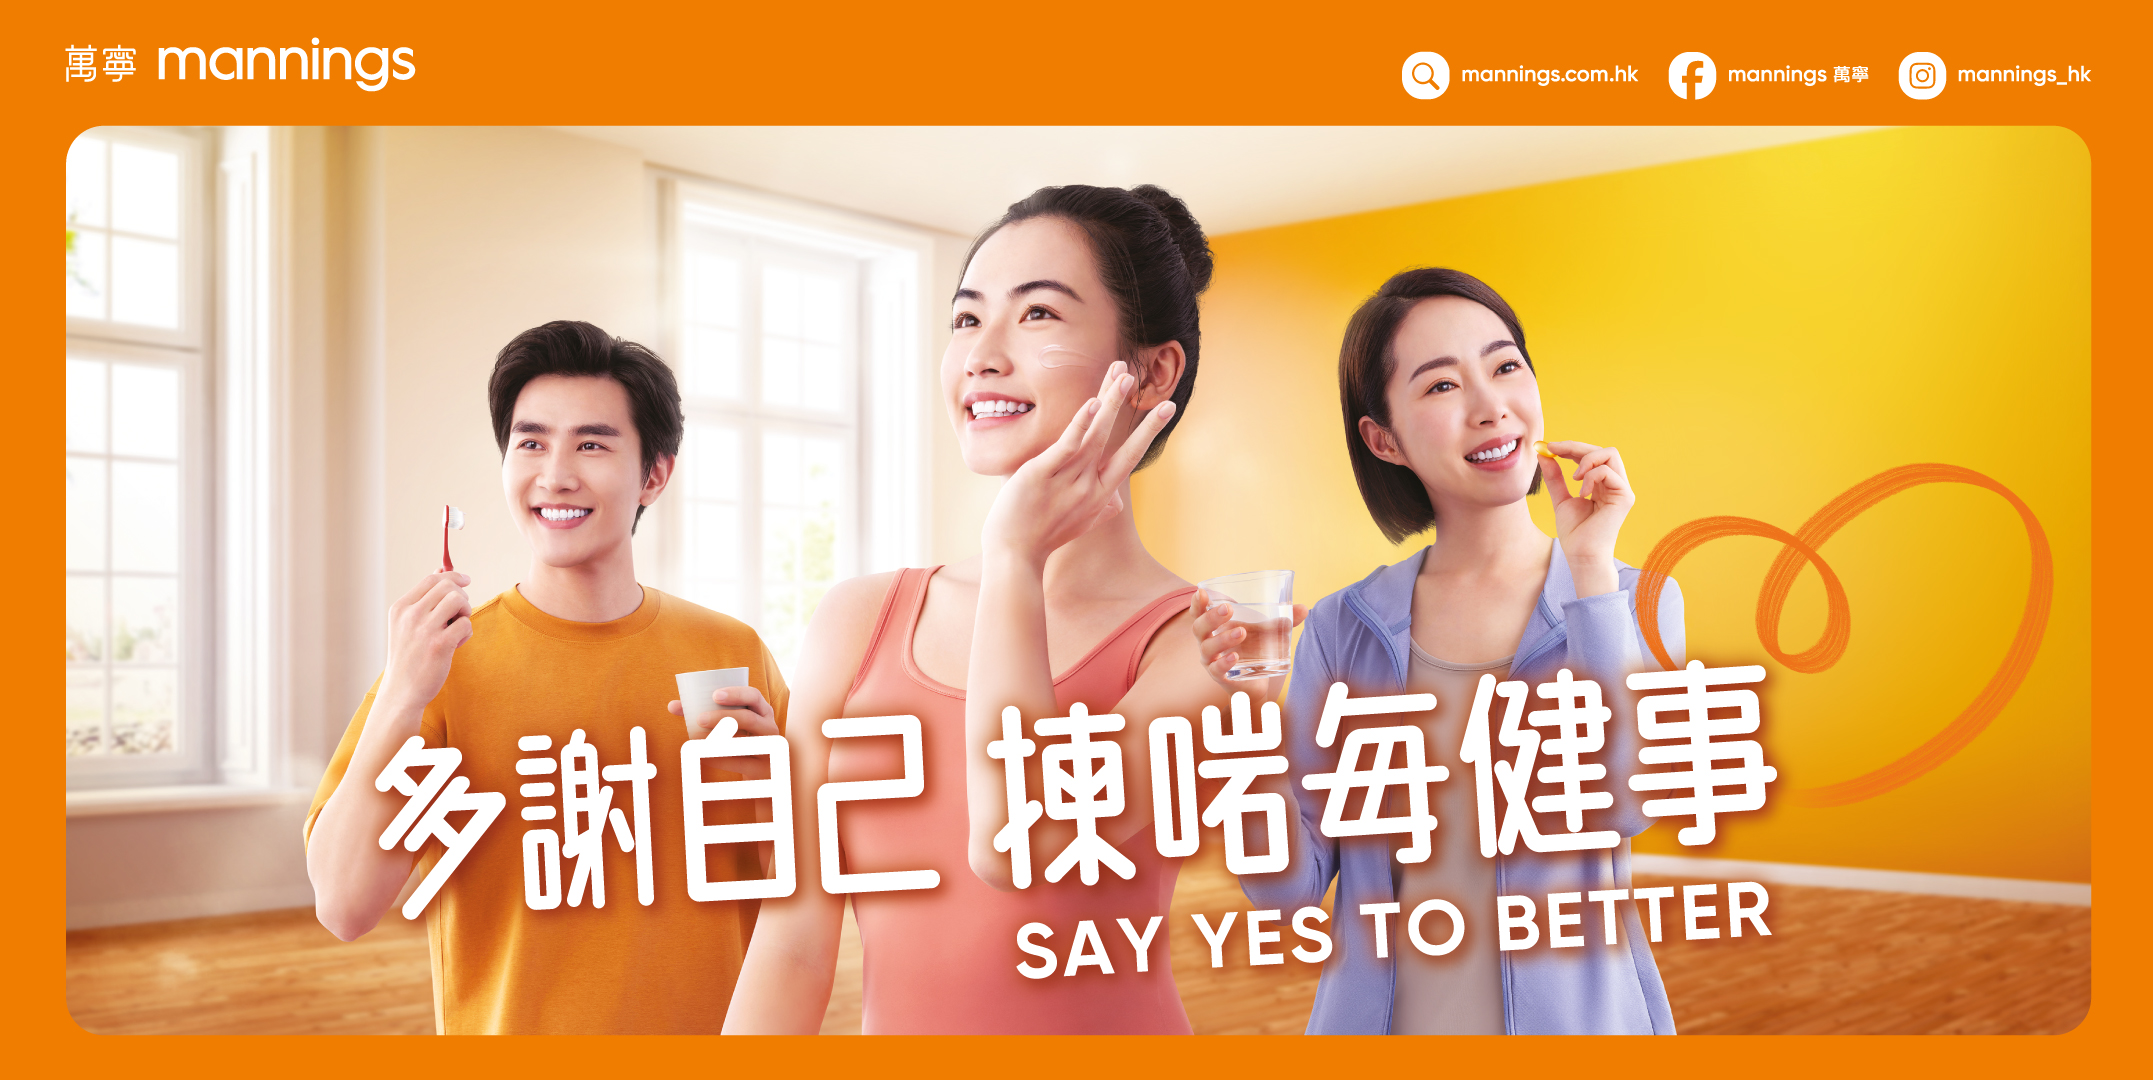 Mannings launches new brand campaign Say Yes to Better with DDB Group Hong Kong [Video]